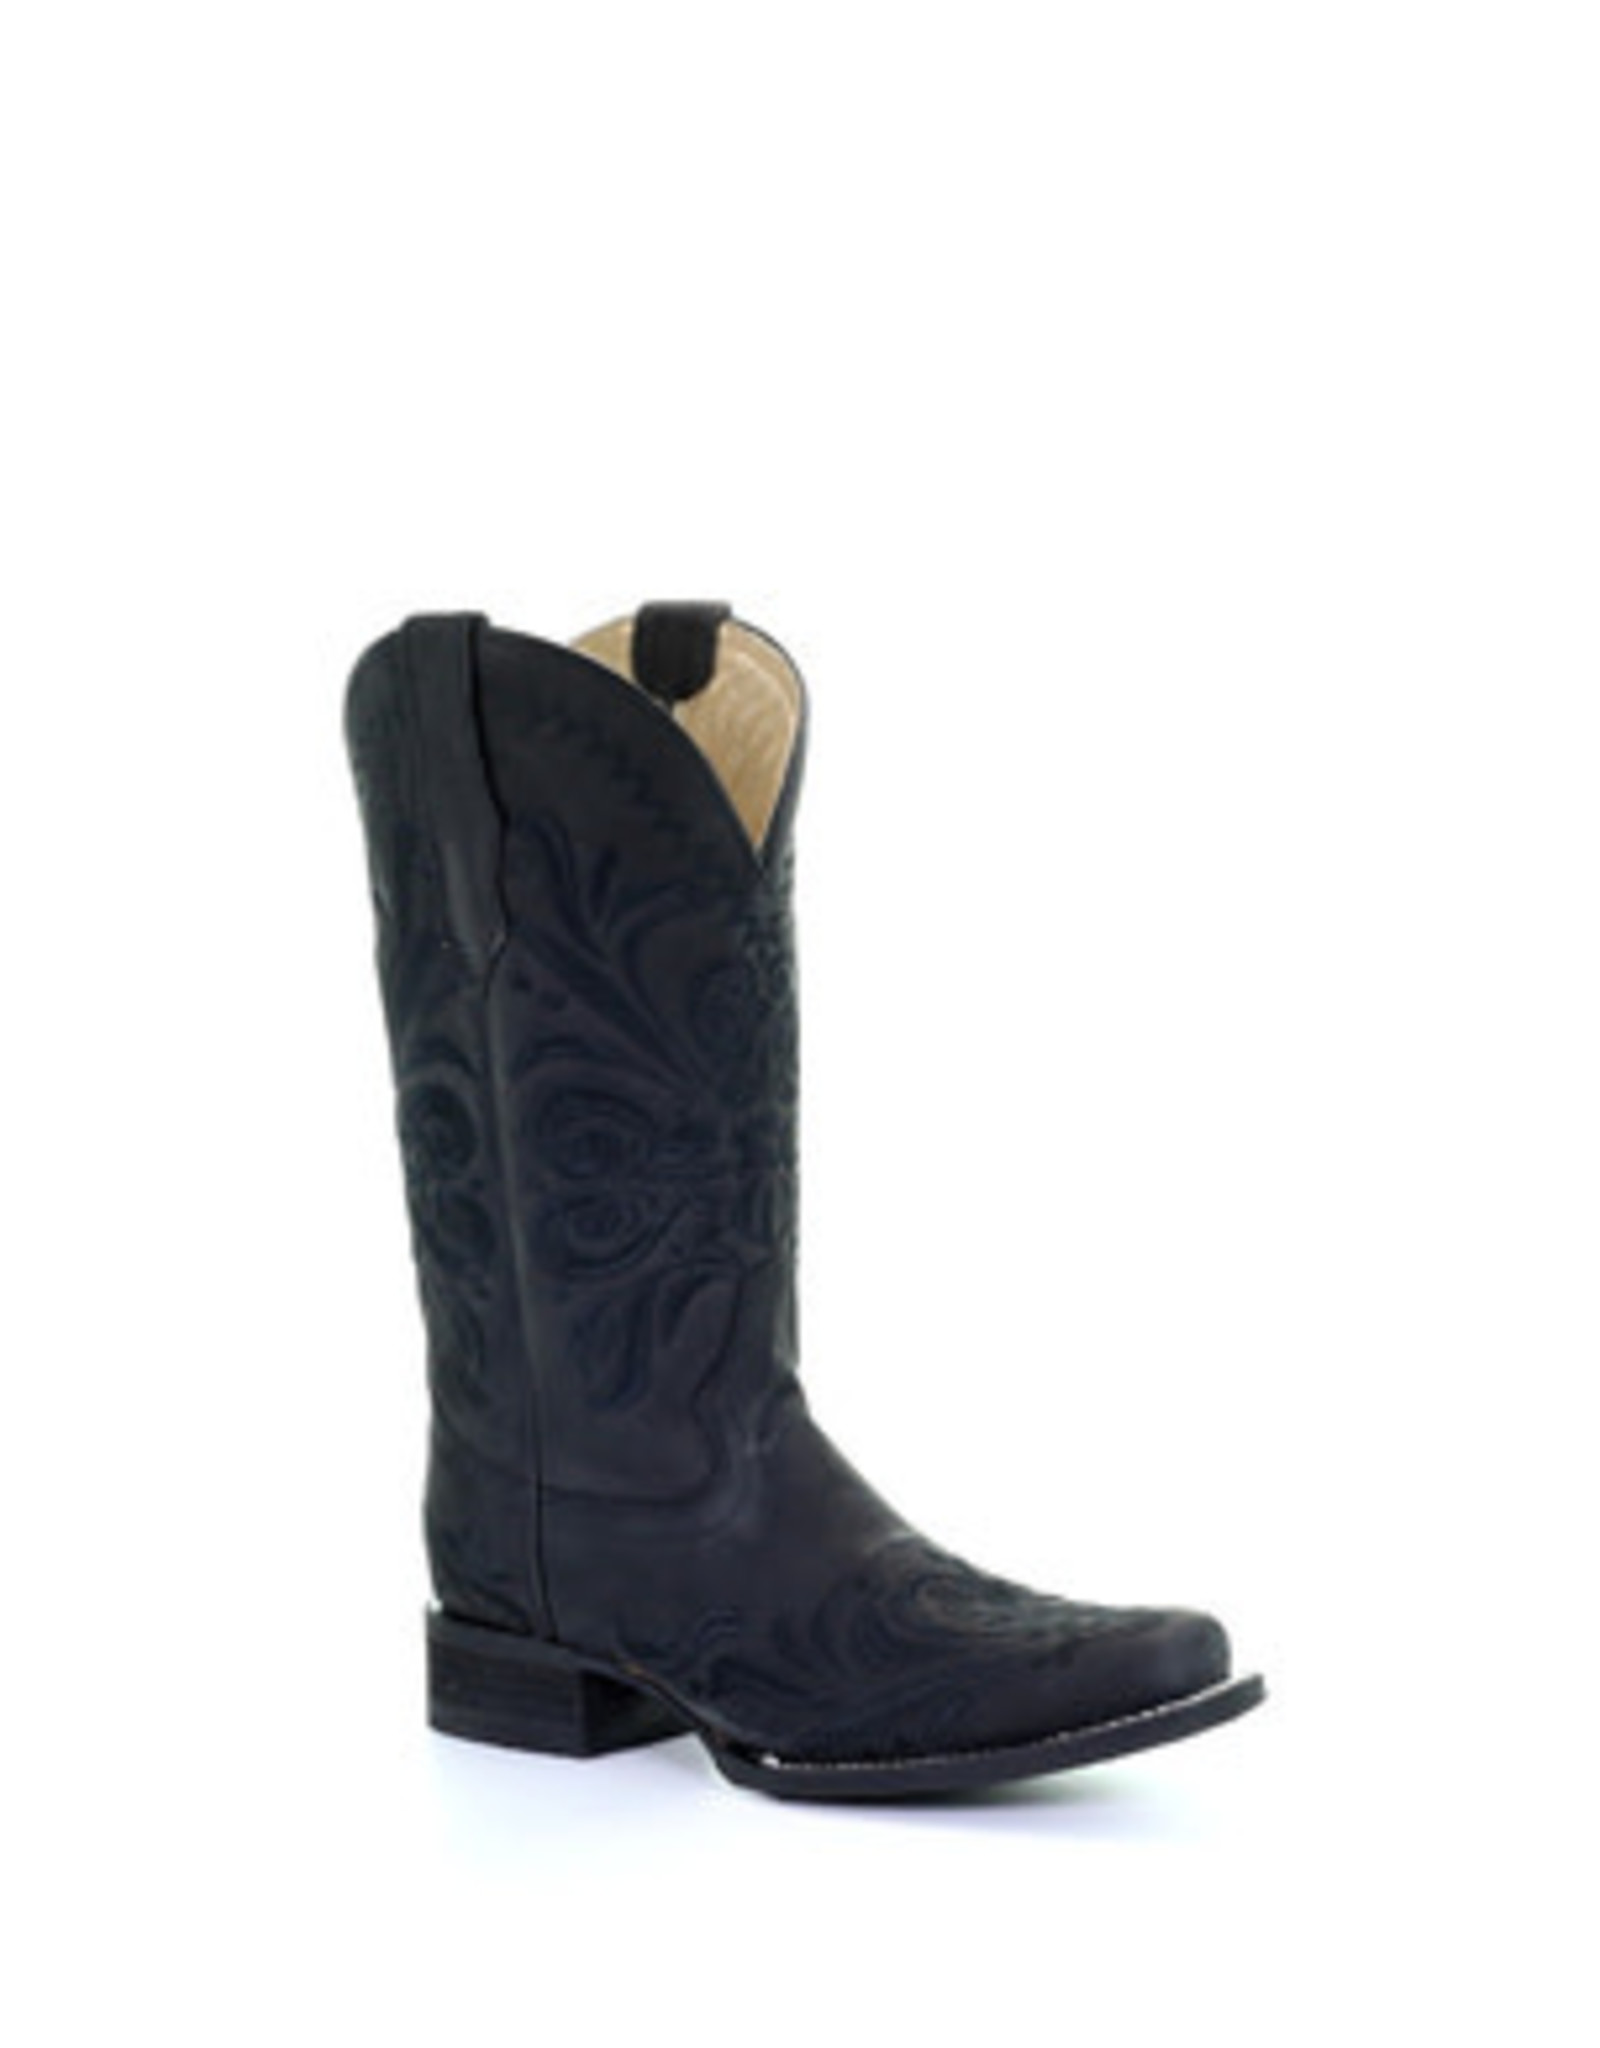 Circle G Ladies Black Embroidered L5464 Western Boots